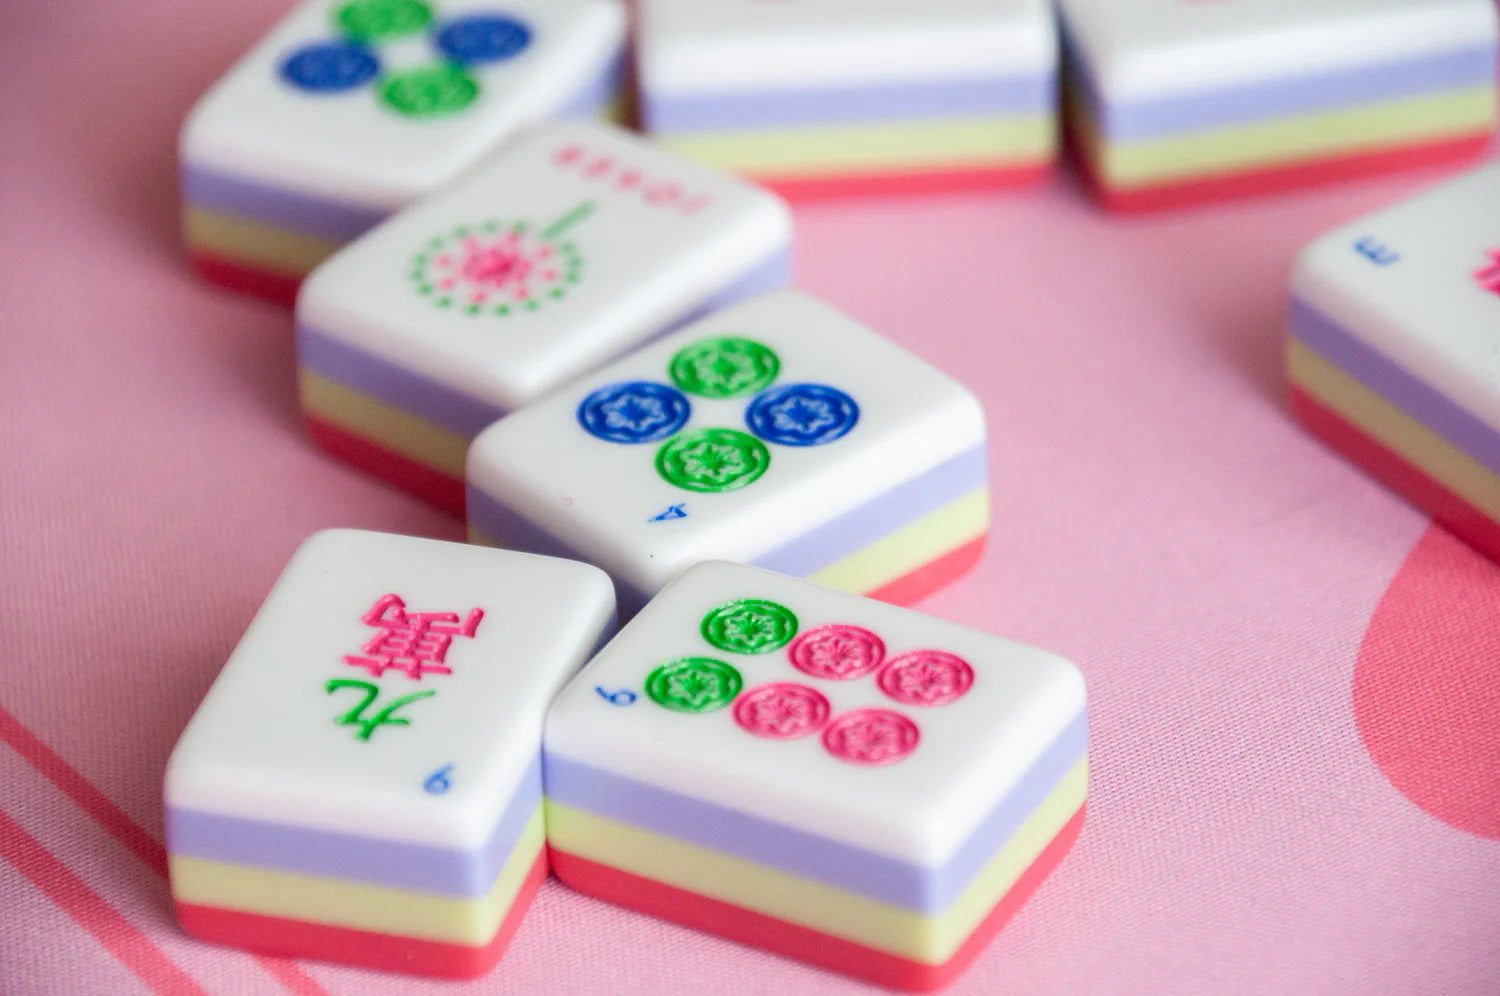 4 Mahjong tiles with pink, green and blue sitting on a pink Mahjong game board.